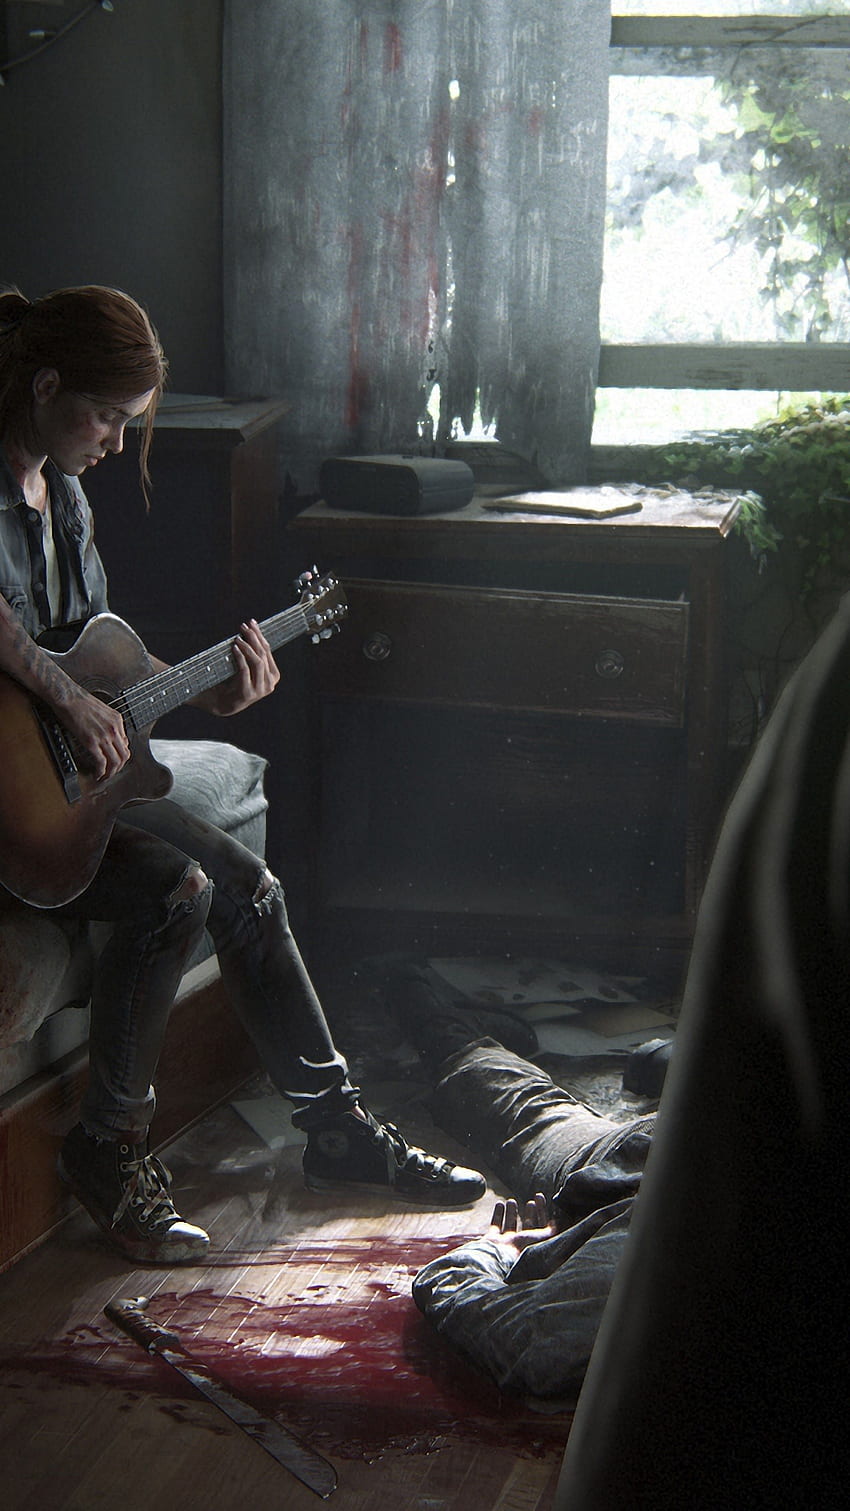 Wallpaper the city, guitar, skyscrapers, postapokalipsis, fan art, Ellie, the  last of us for mobile and desktop, section игры, resolution 1920x1080 -  download